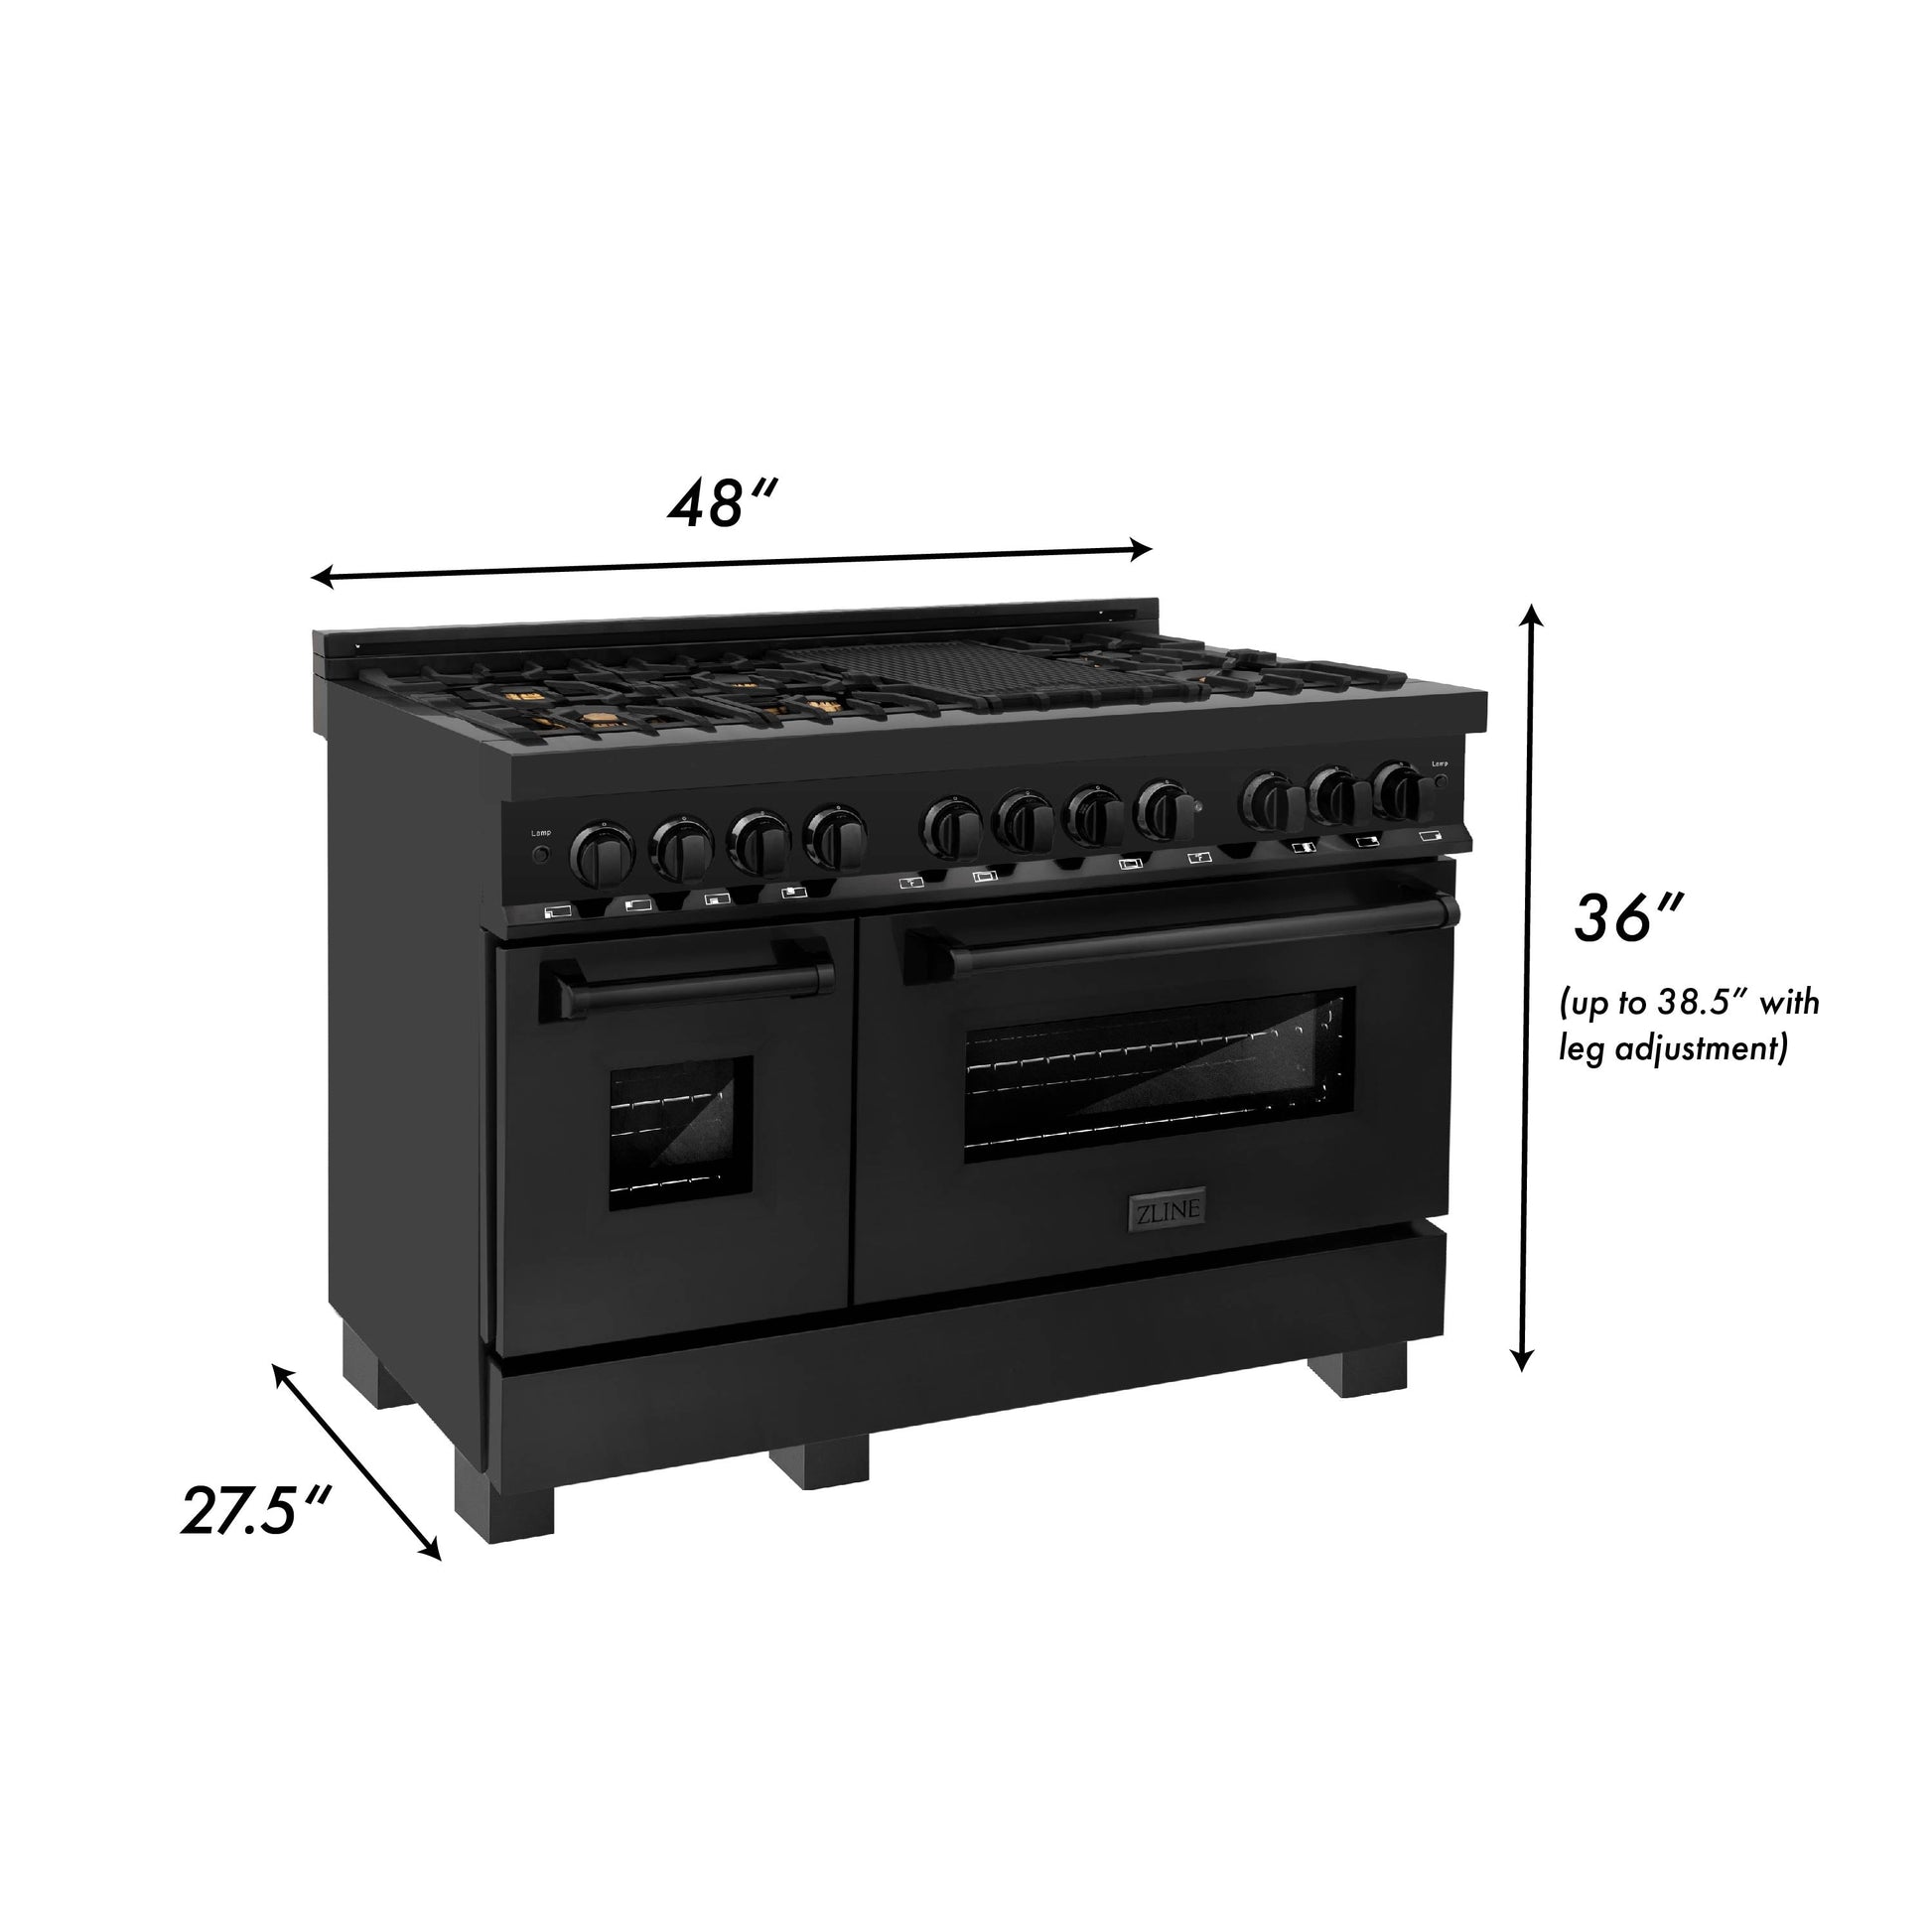 ZLINE 48 in. 6.0 cu. ft. Dual Fuel Range with Gas Stove and Electric Oven in Black Stainless Steel with Brass Burners (RAB-BR-48) dimensional diagram with measurements.